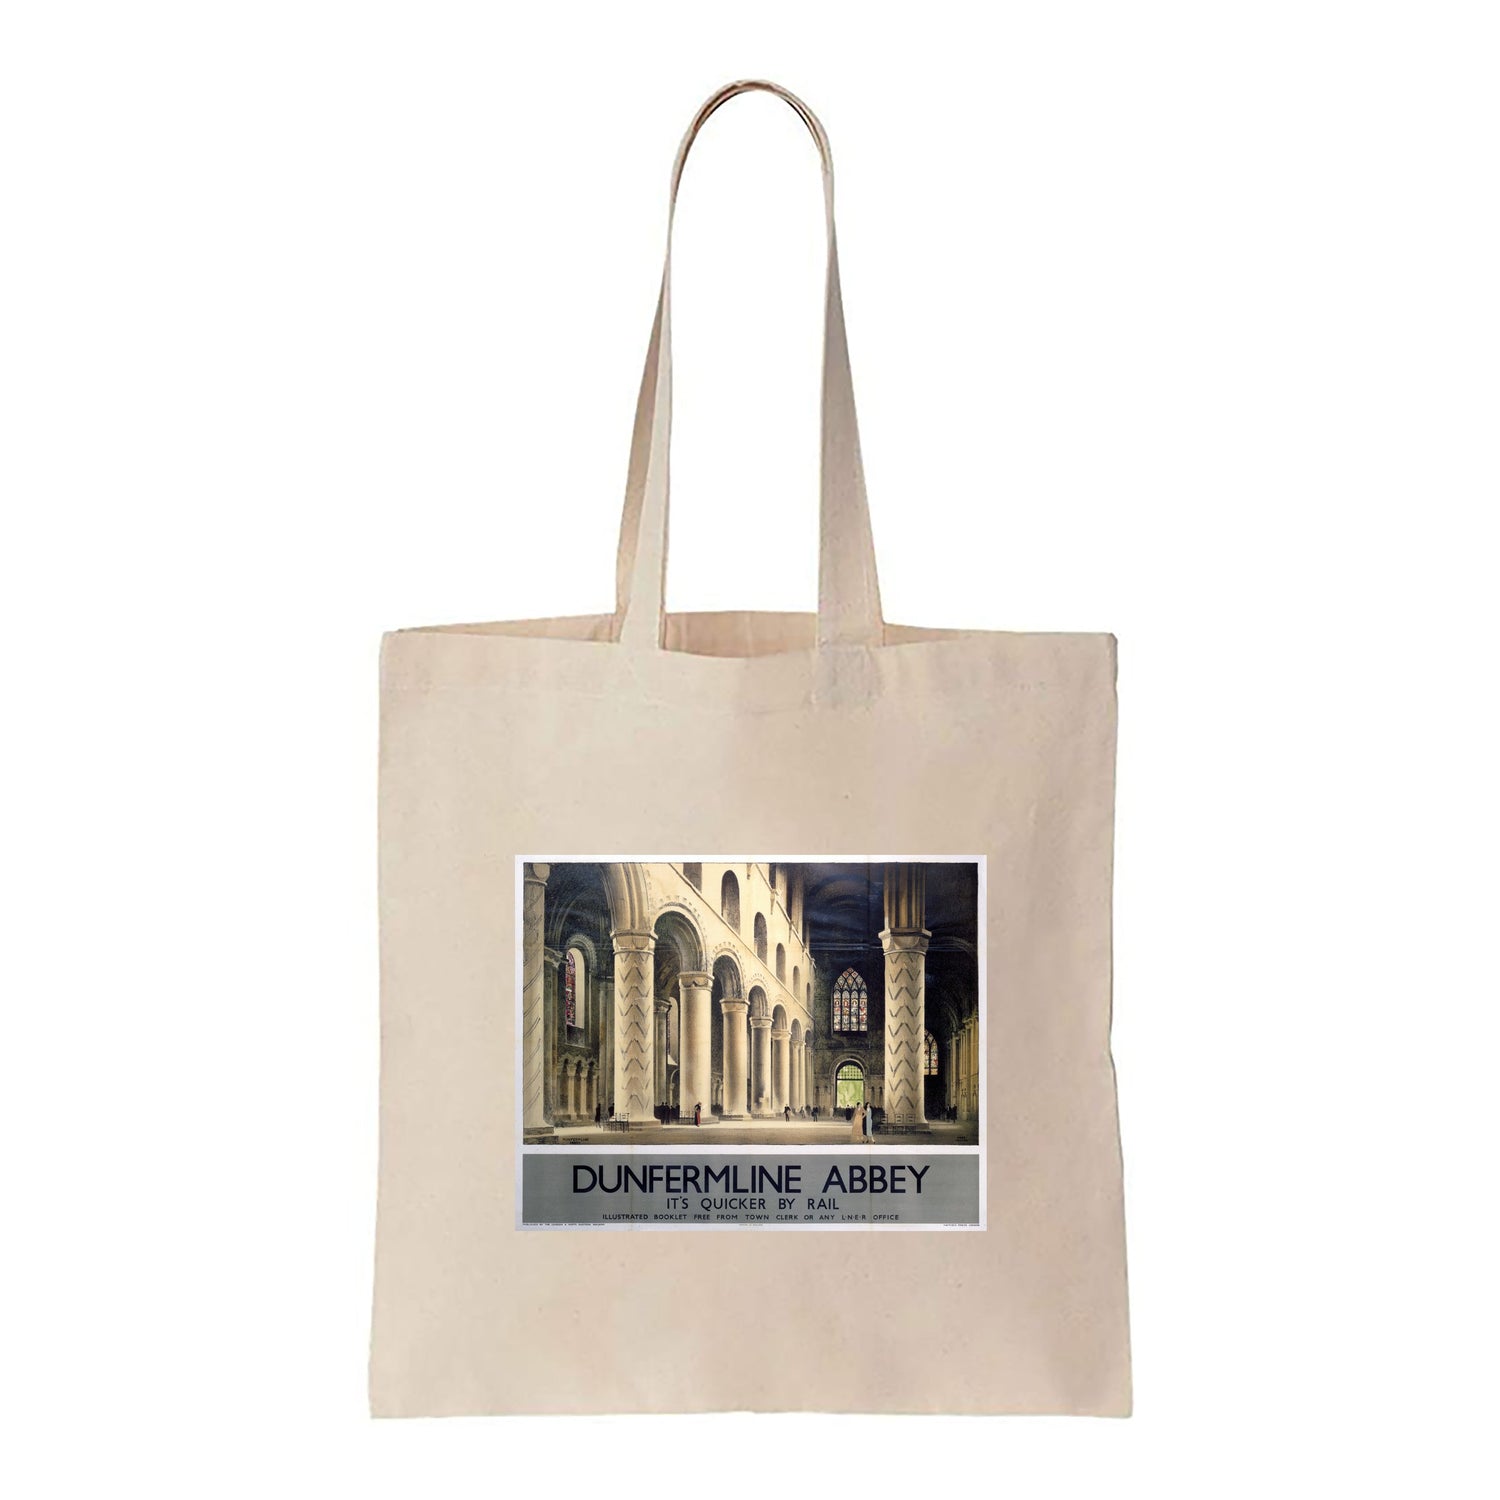 Dunfermline Abbey - Quicker By Rail - Canvas Tote Bag